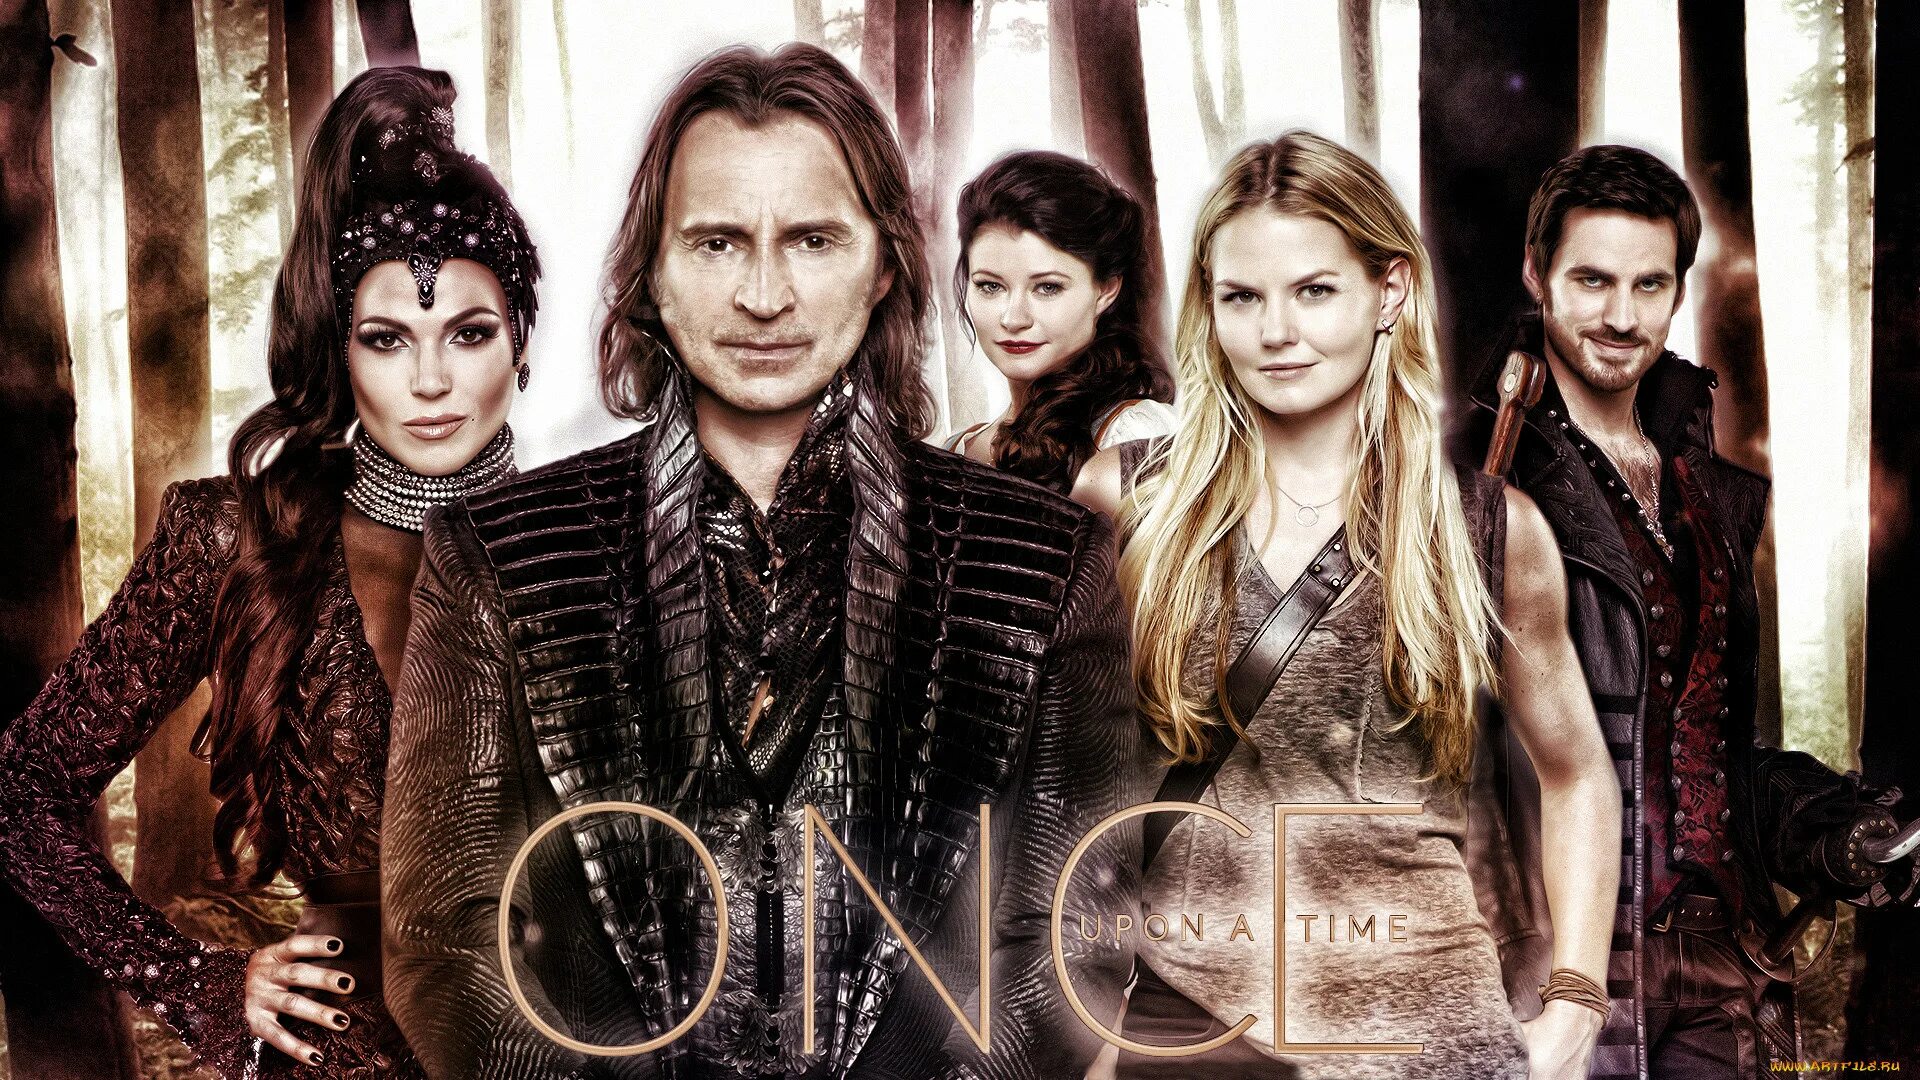 0 once. Однажды в сказке once upon a TIMEУ. Once upon a time персонажи.